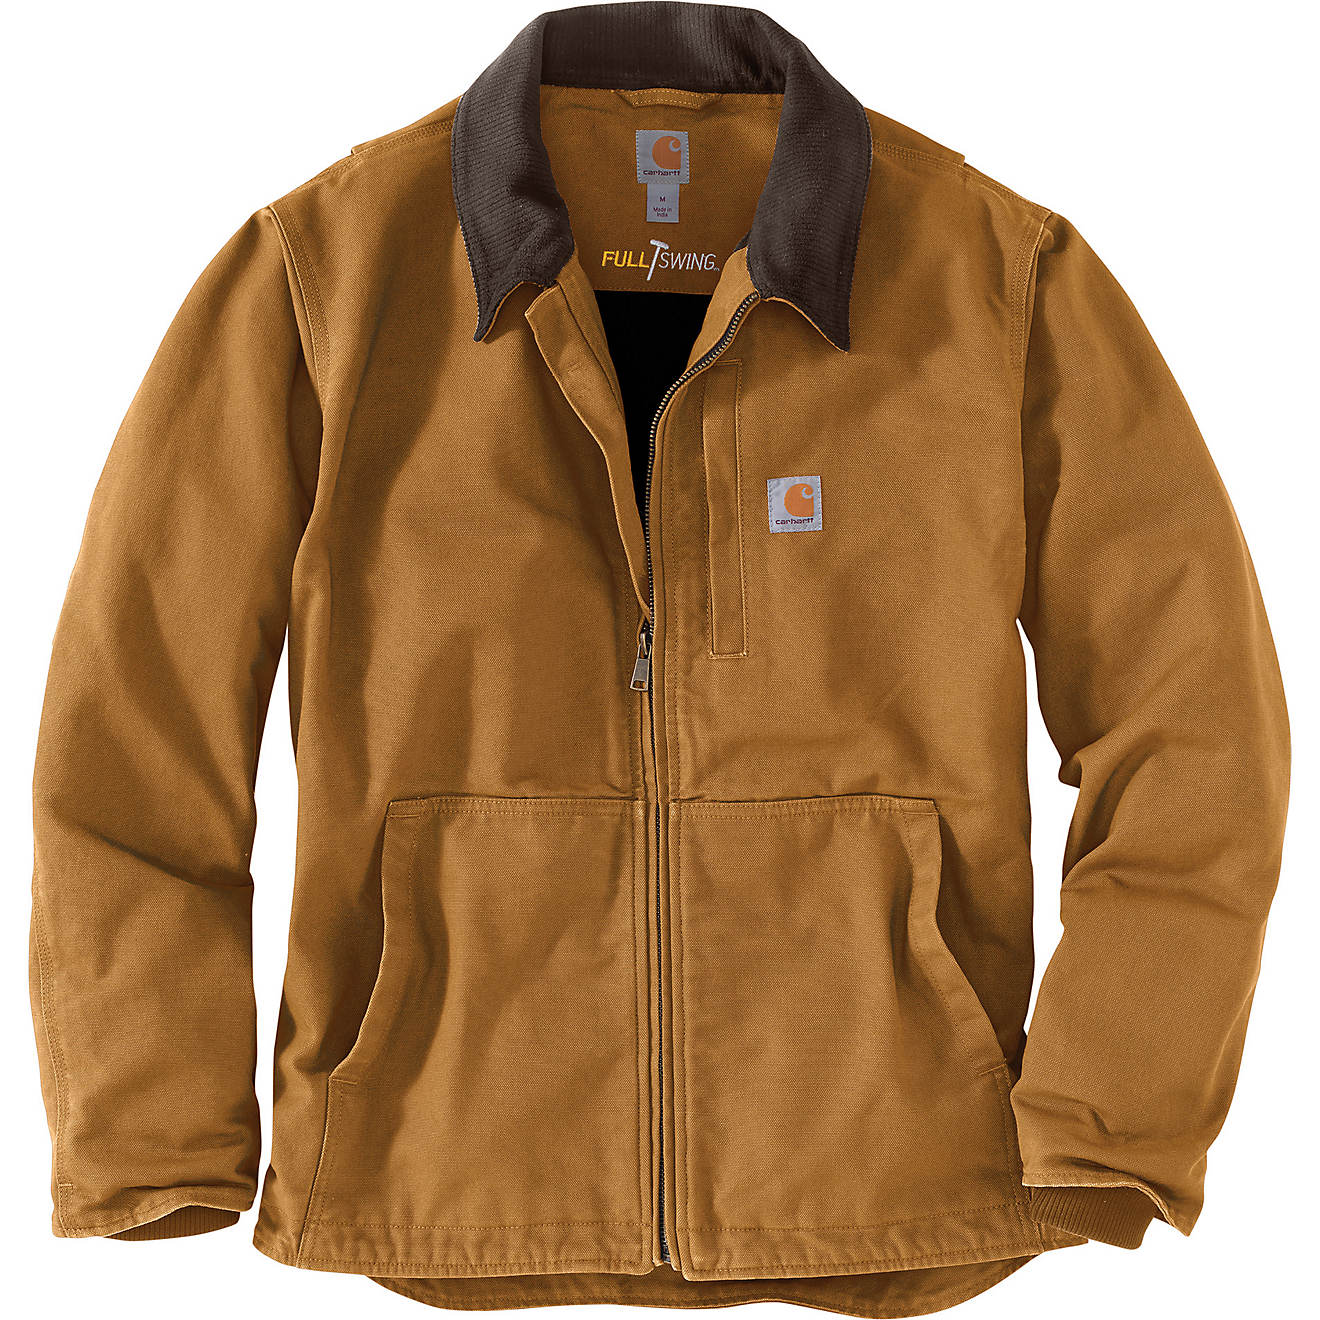 Carhartt Men's Full Swing Armstrong Jacket                                                                                       - view number 1